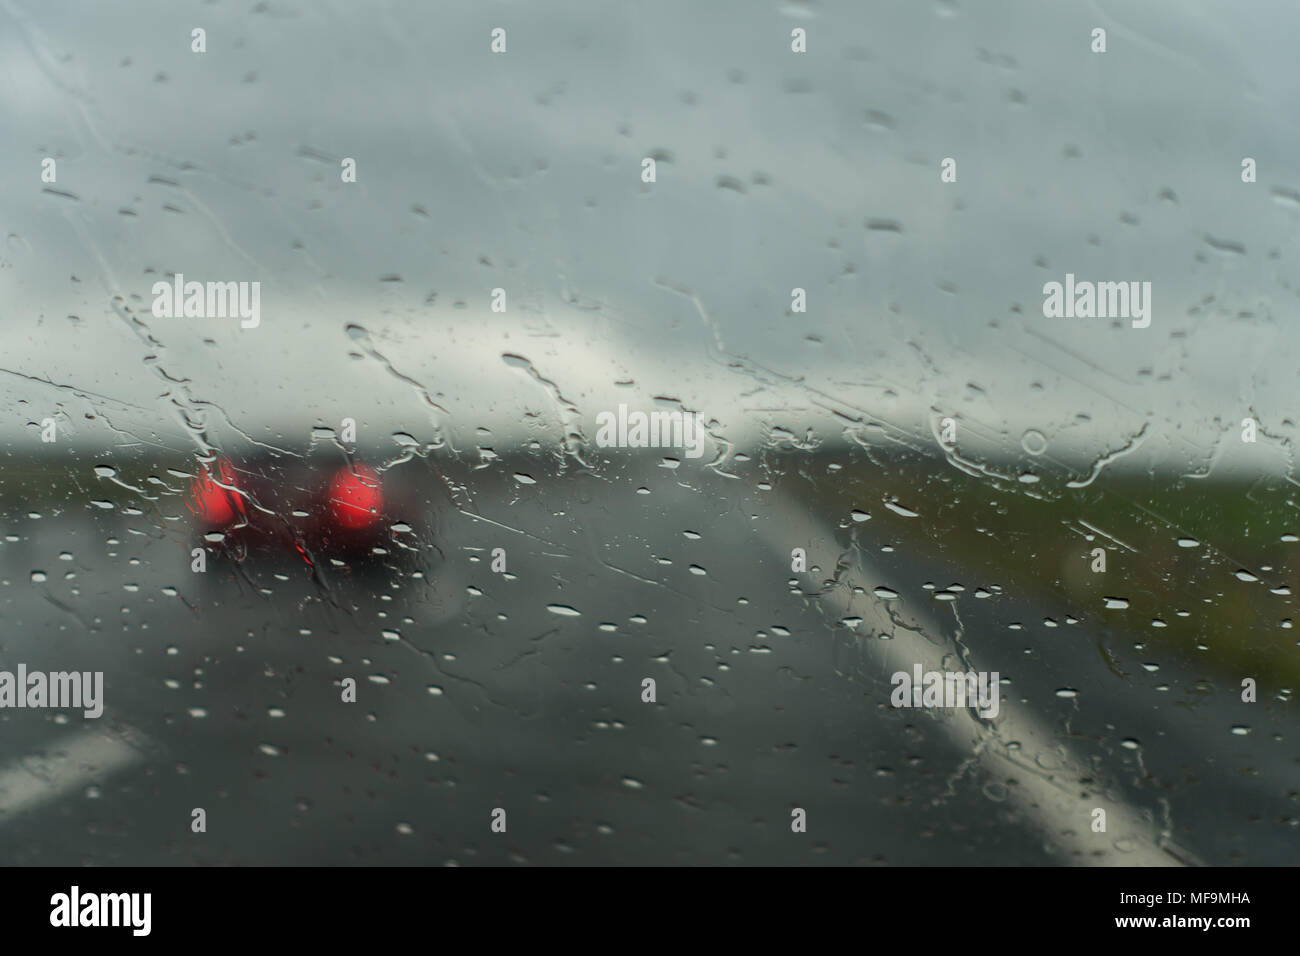 A rainy day on the highway and a car passing by Stock Photo